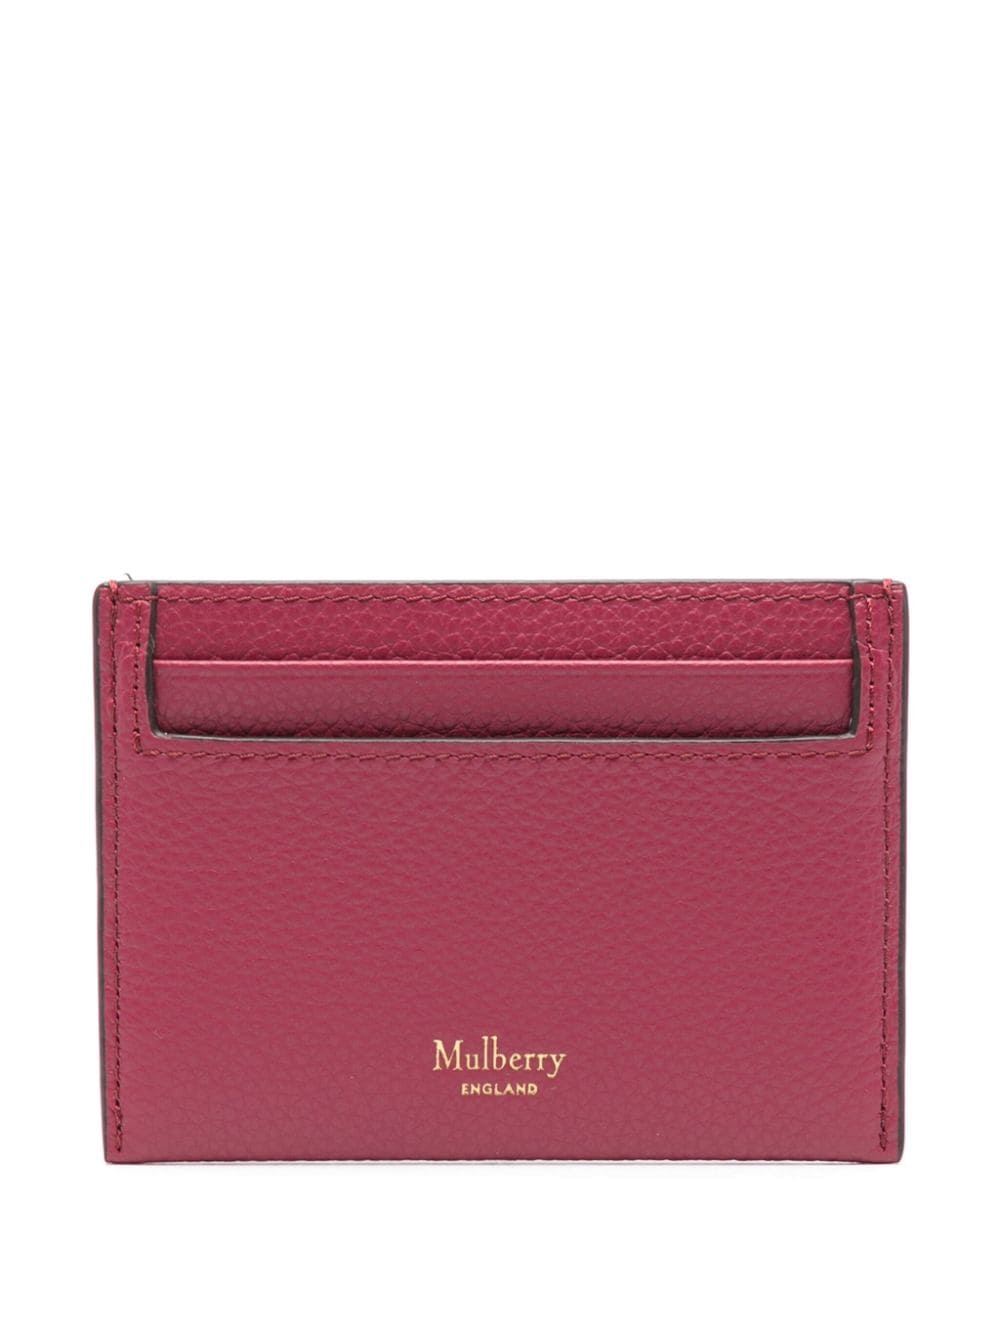 Mulberry Continental leather cardholder - Pink von Mulberry